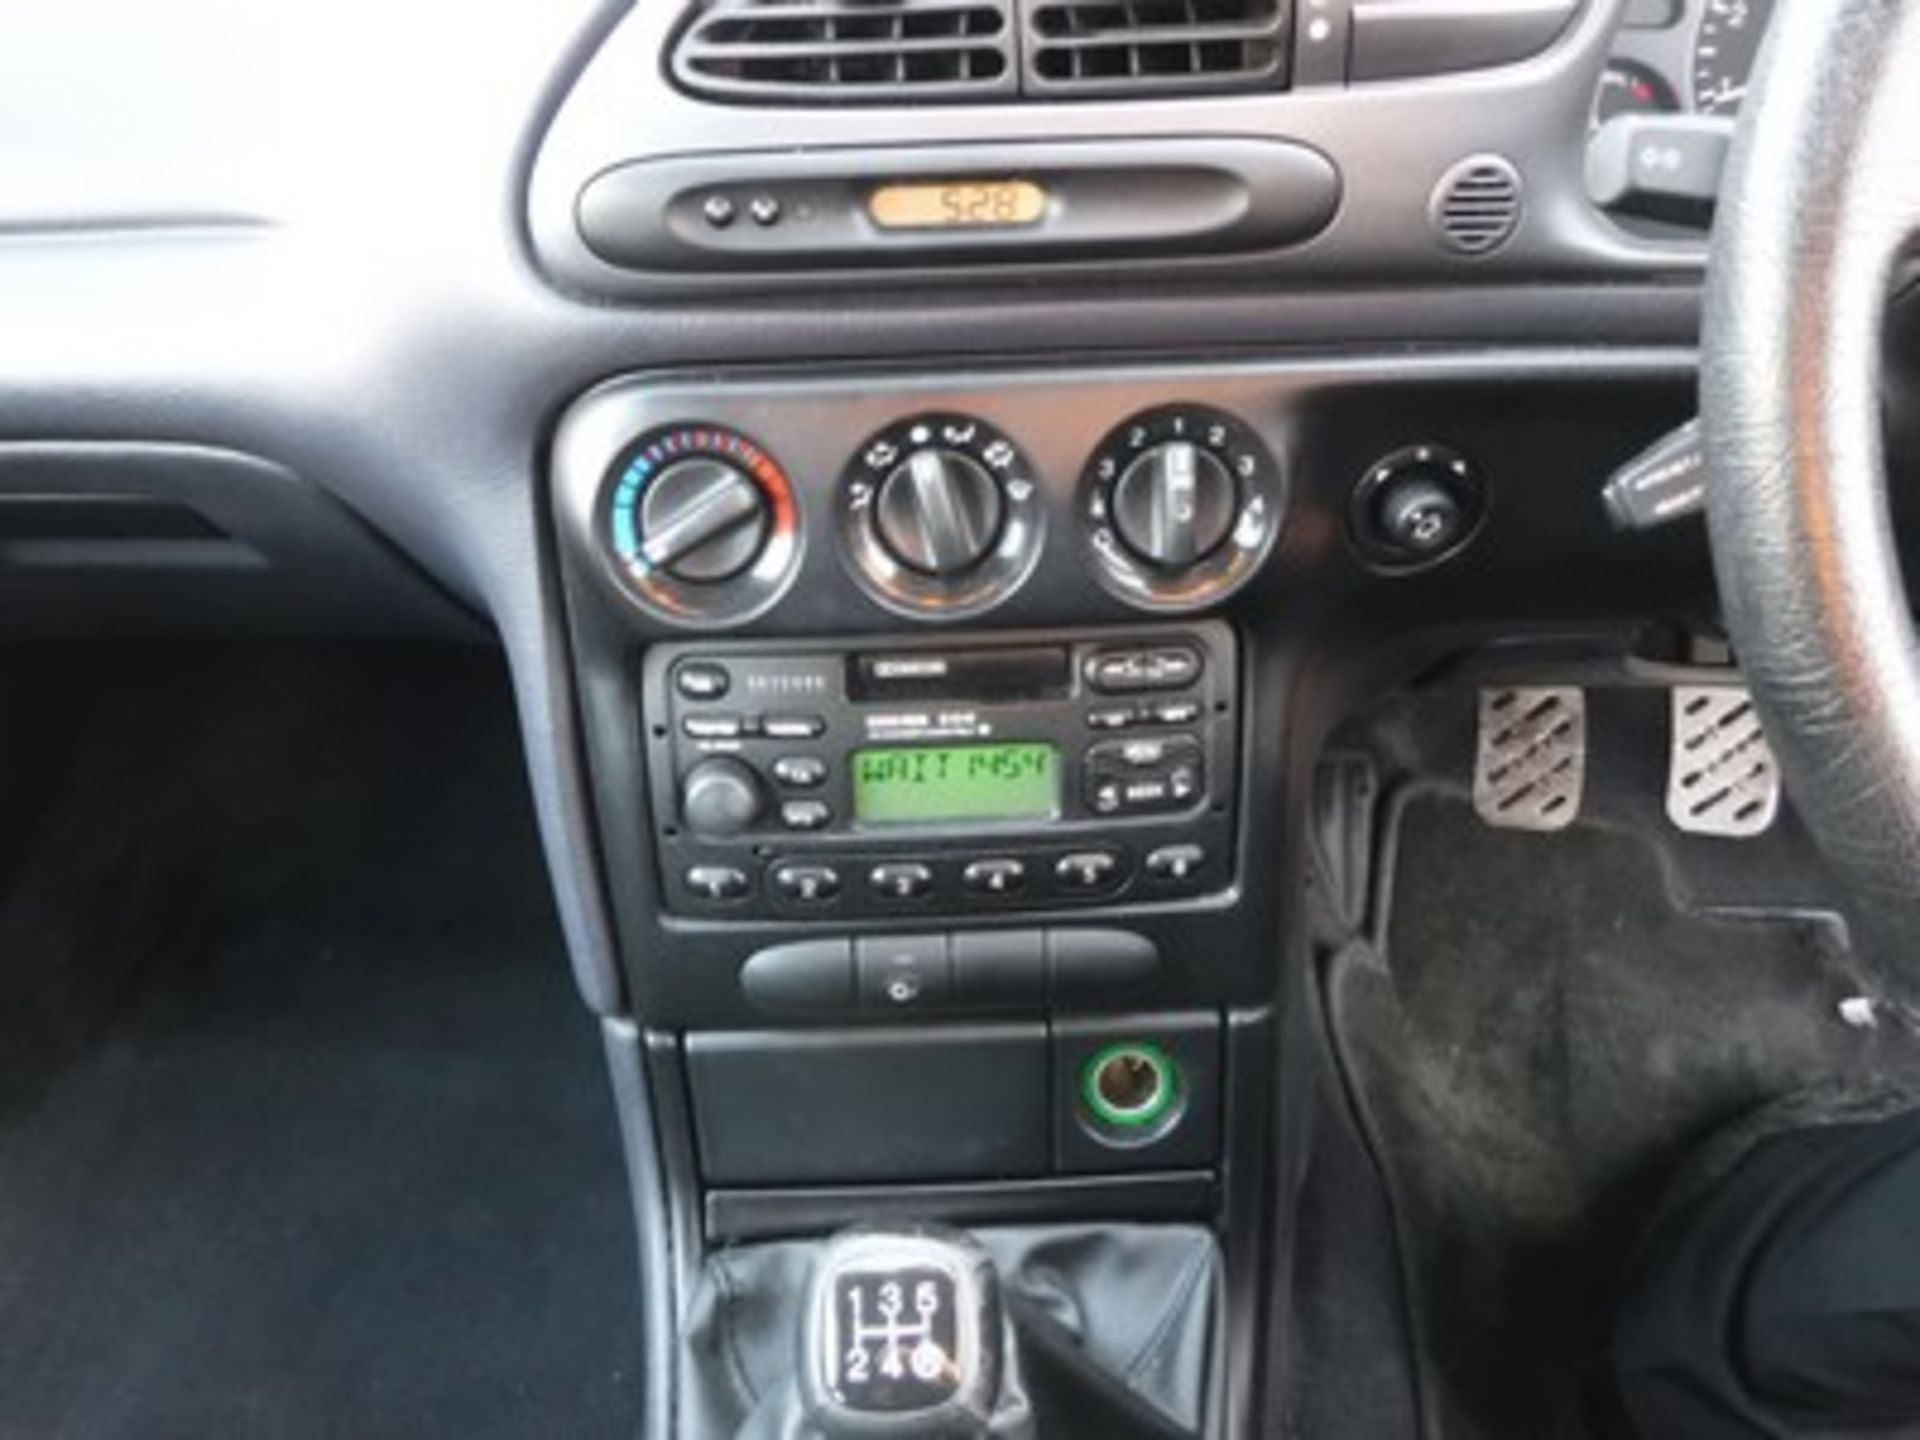 FORD MONDEO ST 24 V6 - 2497cc - Image 17 of 24